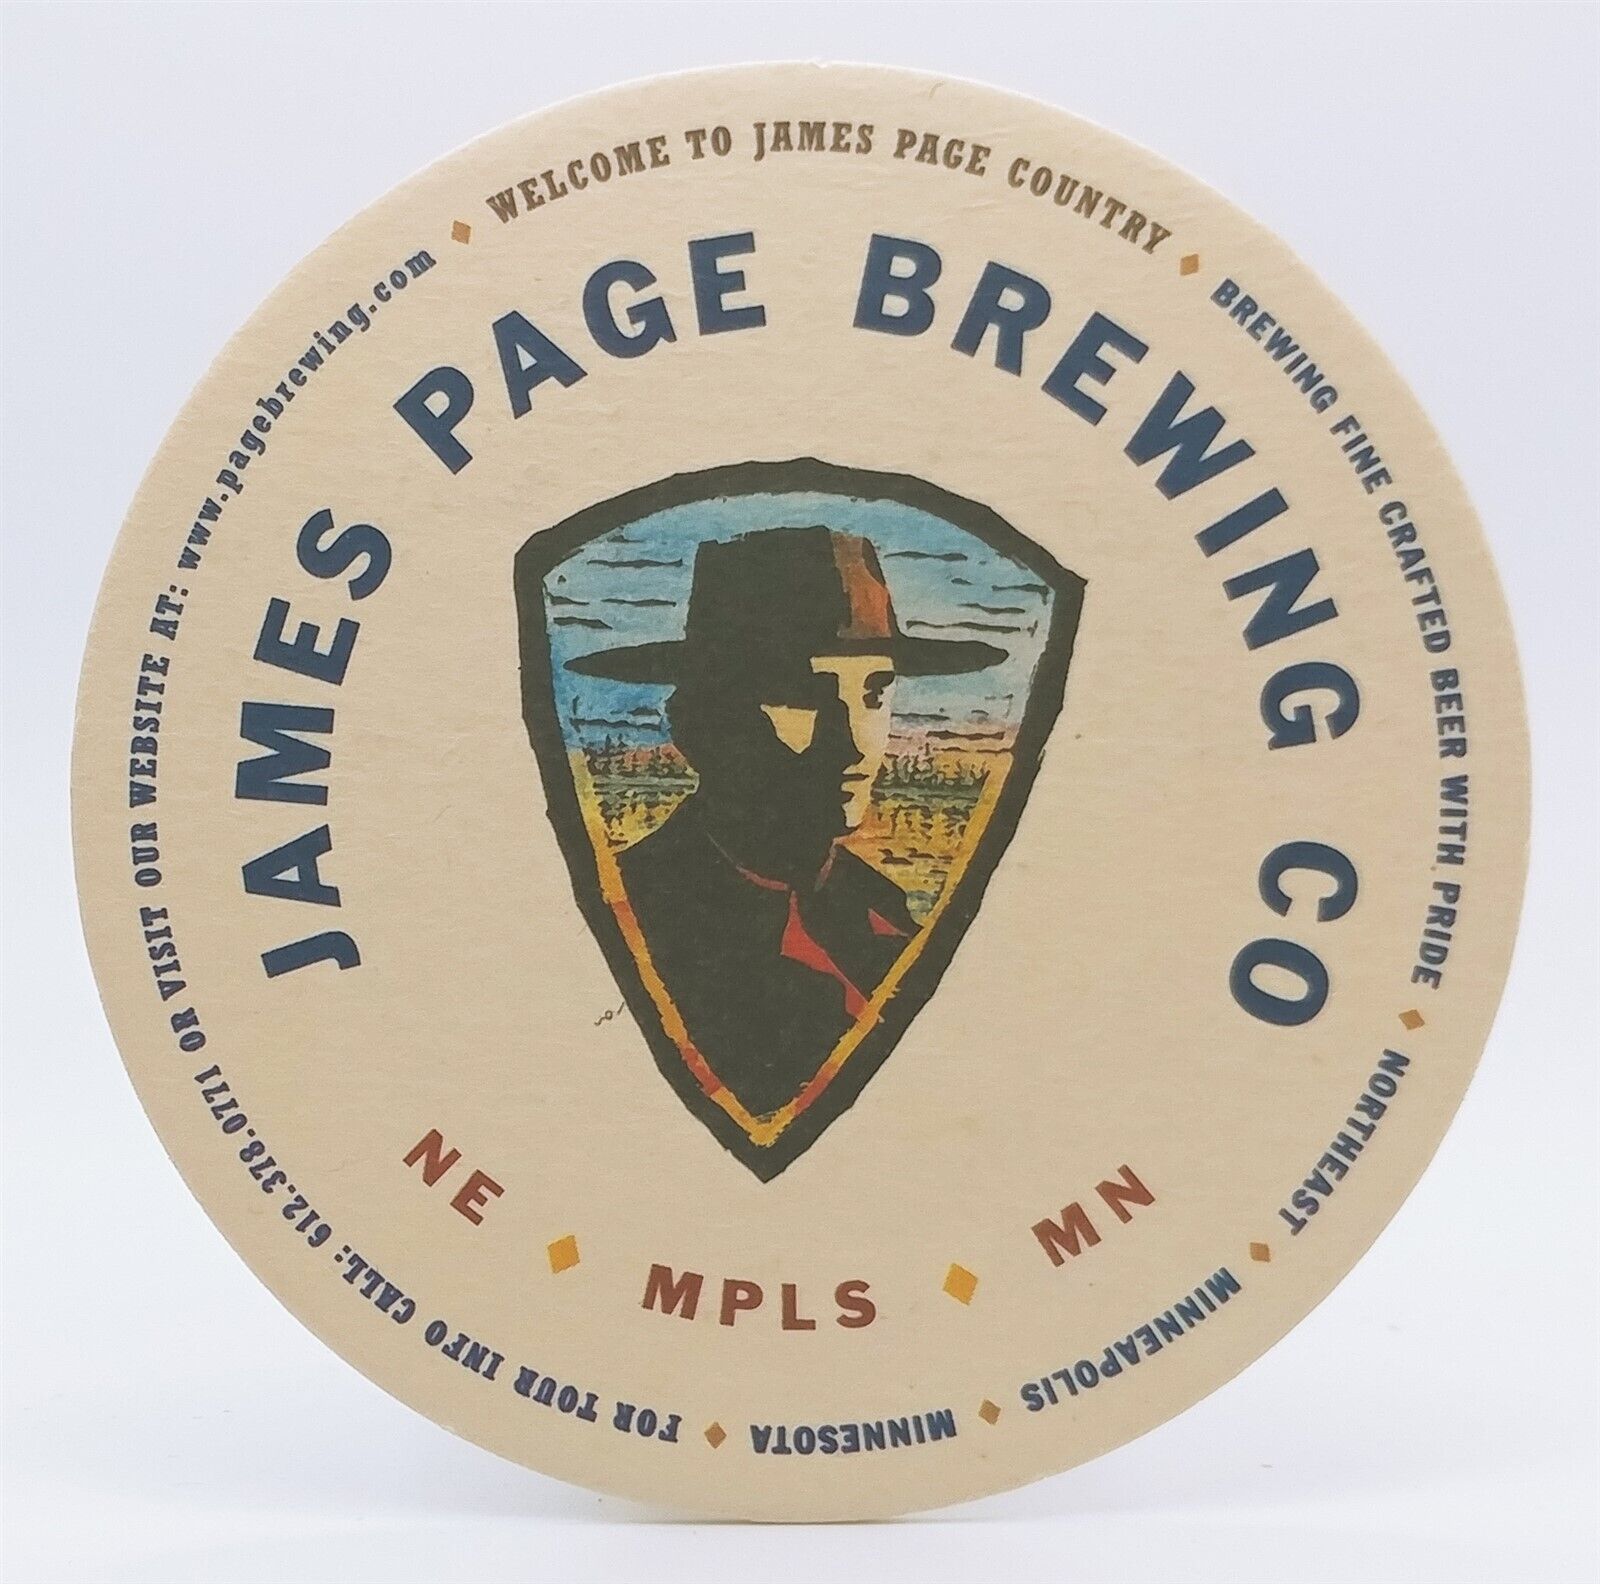 James Page Brewing Company Beer Coaster Minneapolis Minnesota-R458